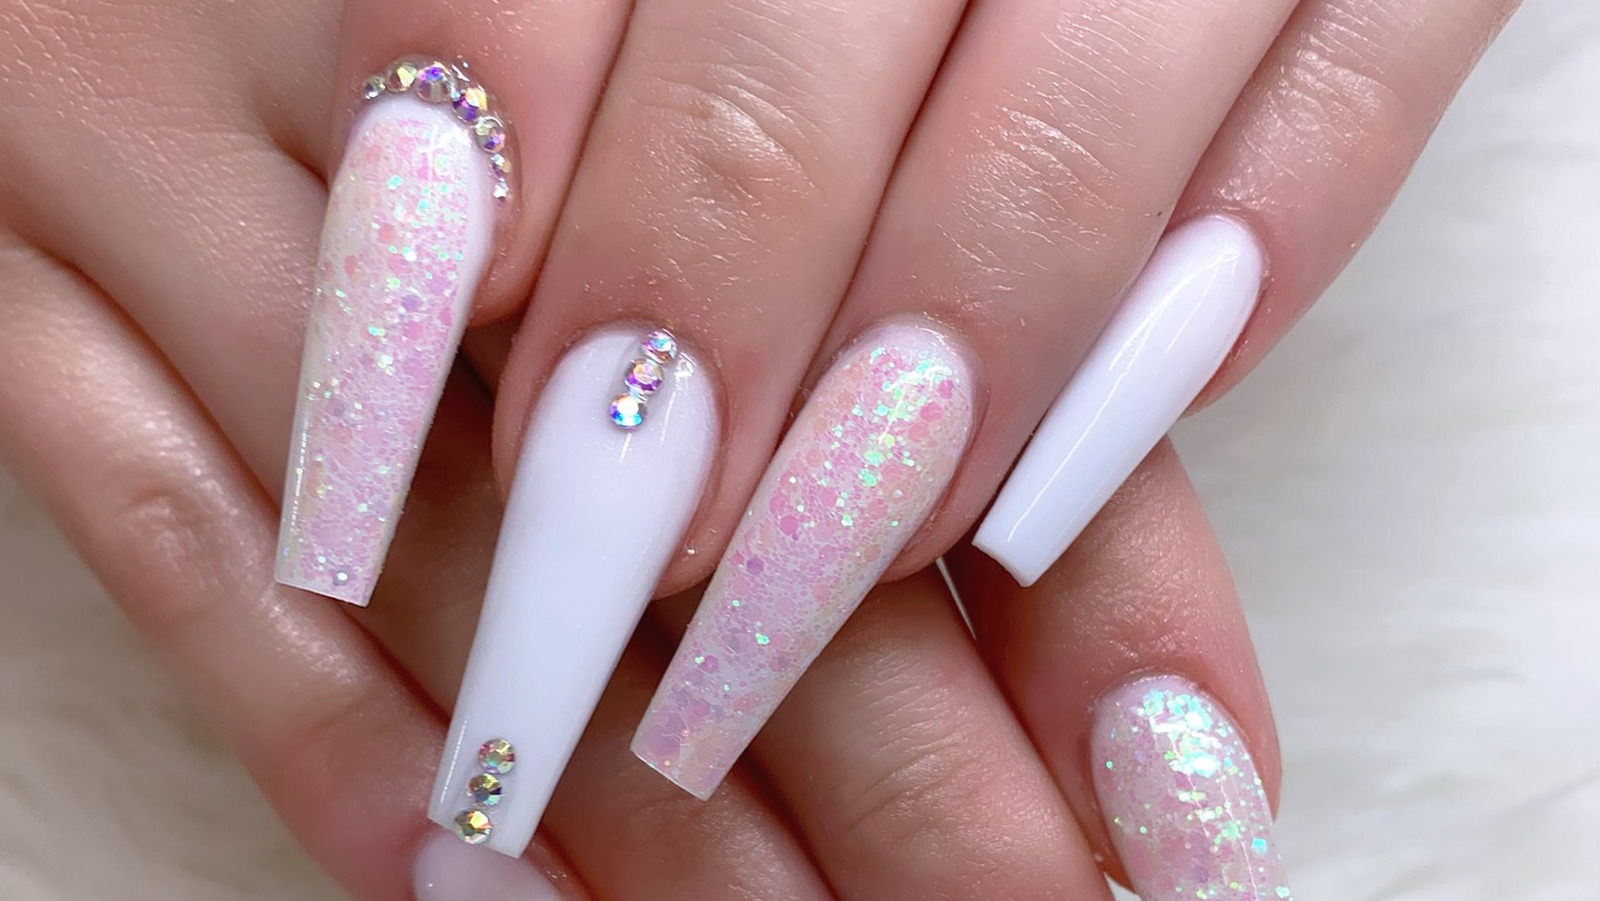 10 Latest Colorful Nail Art Designs To Try in 2023 - MyGlamm